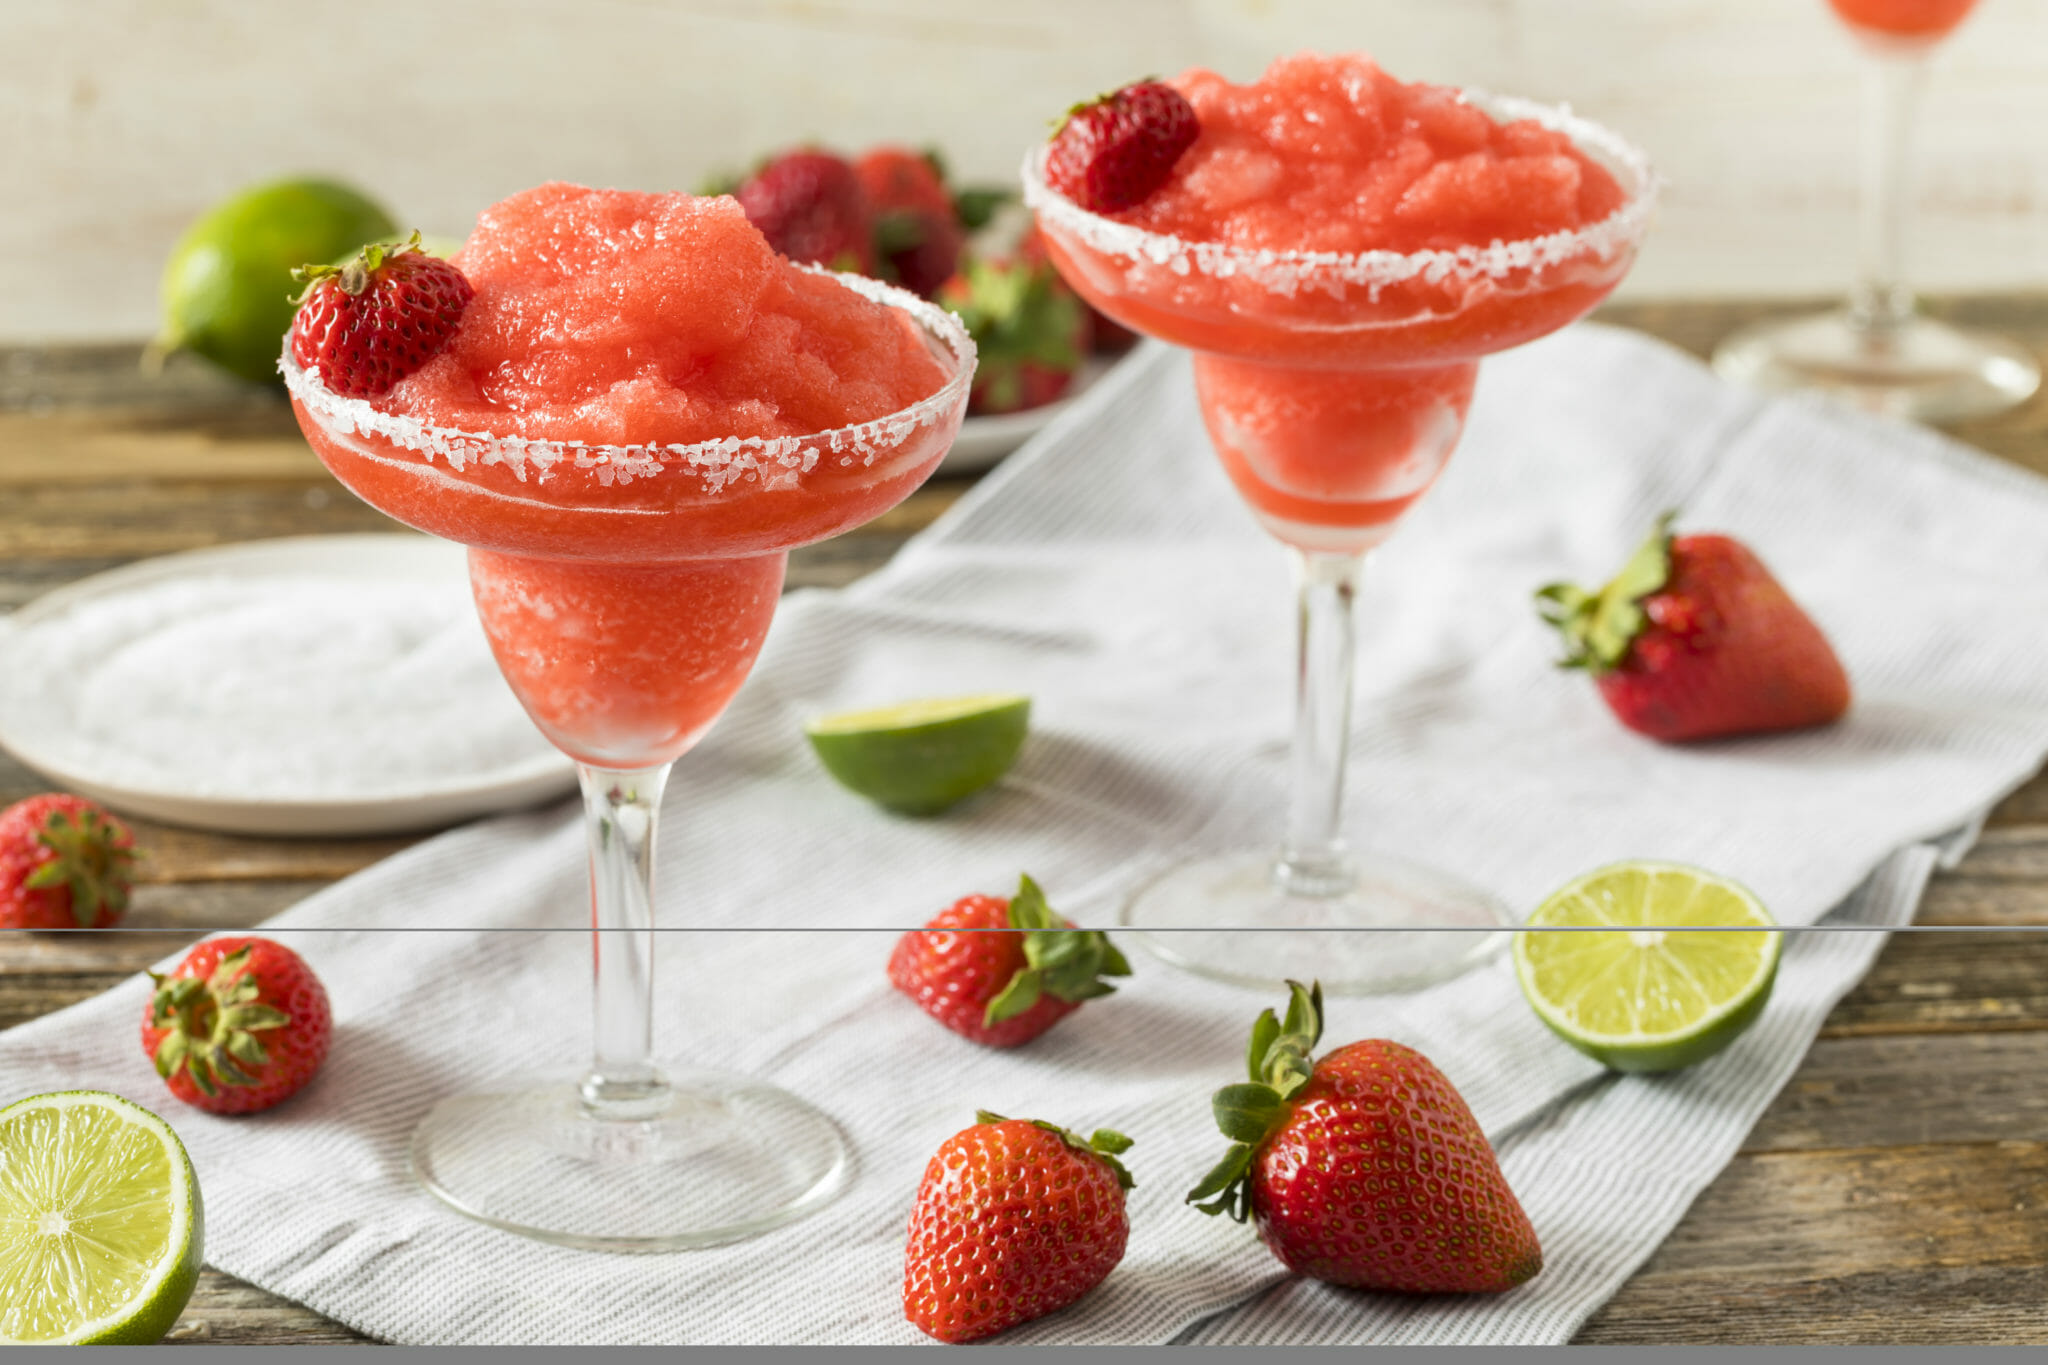 Homemade Red Frozen Strawberry Margarita in a Glass